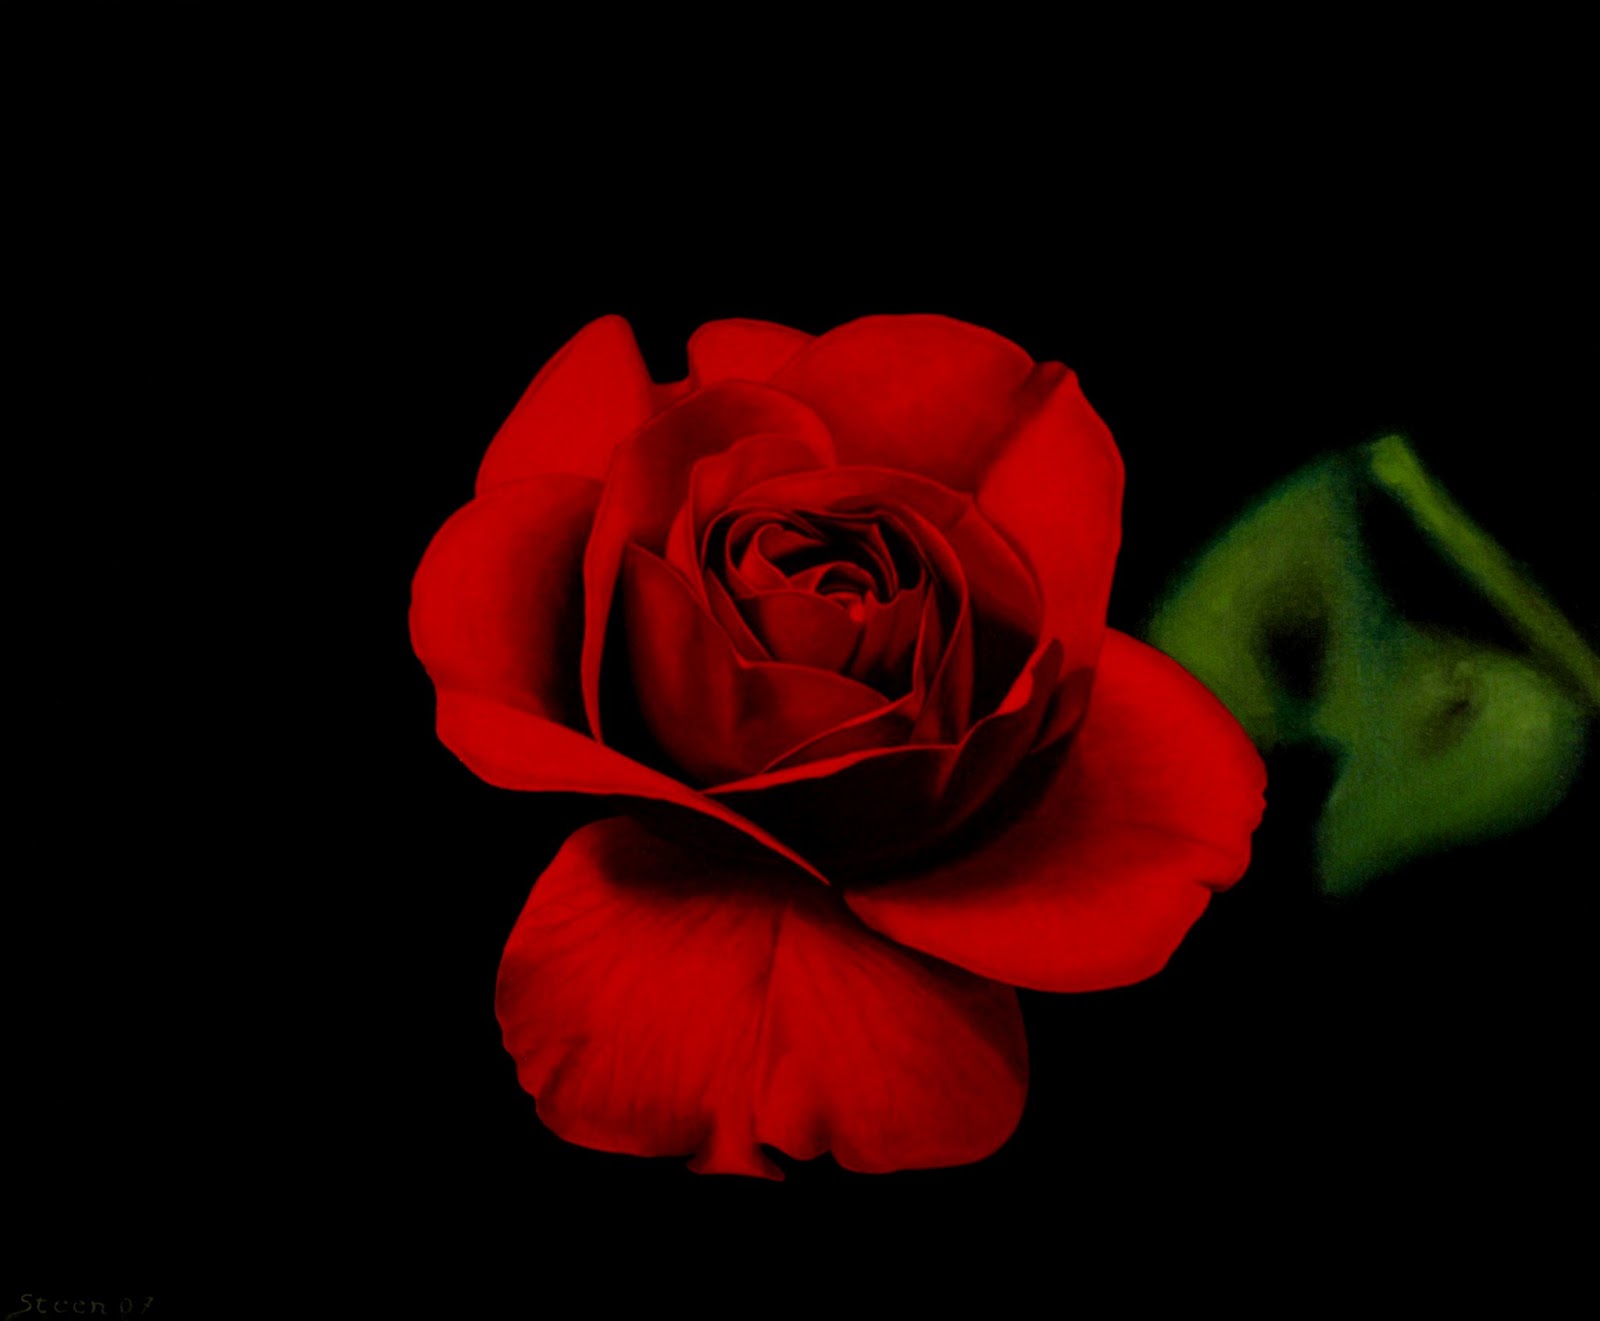 Red Rose With Black Background